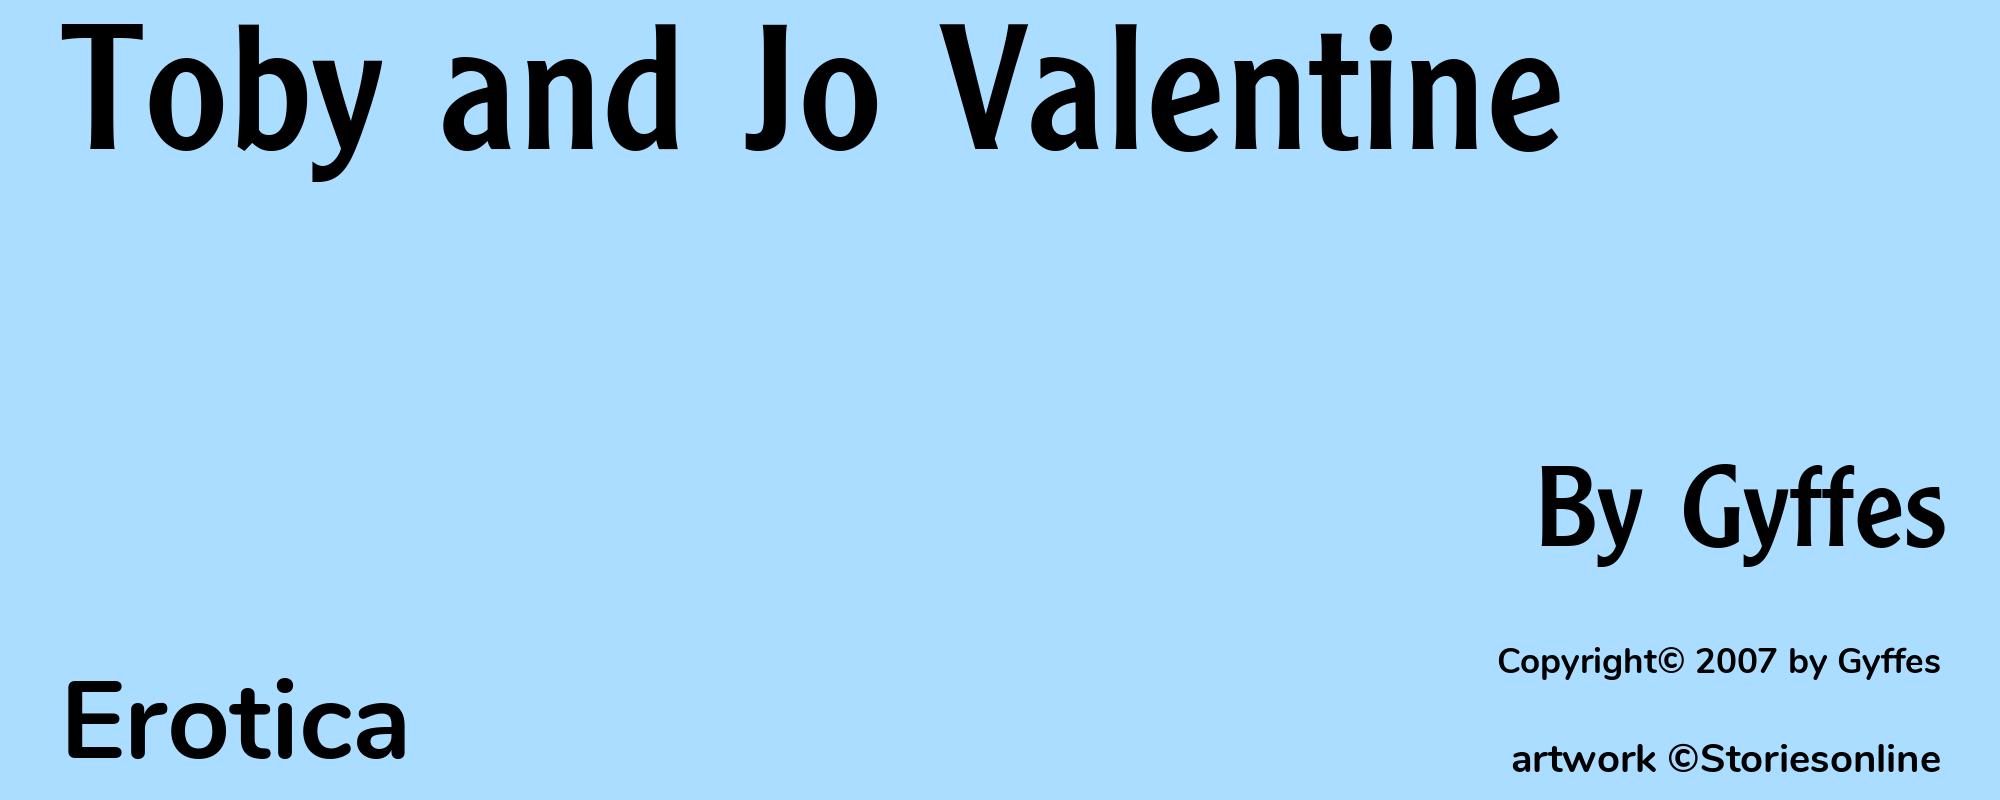 Toby and Jo Valentine - Cover